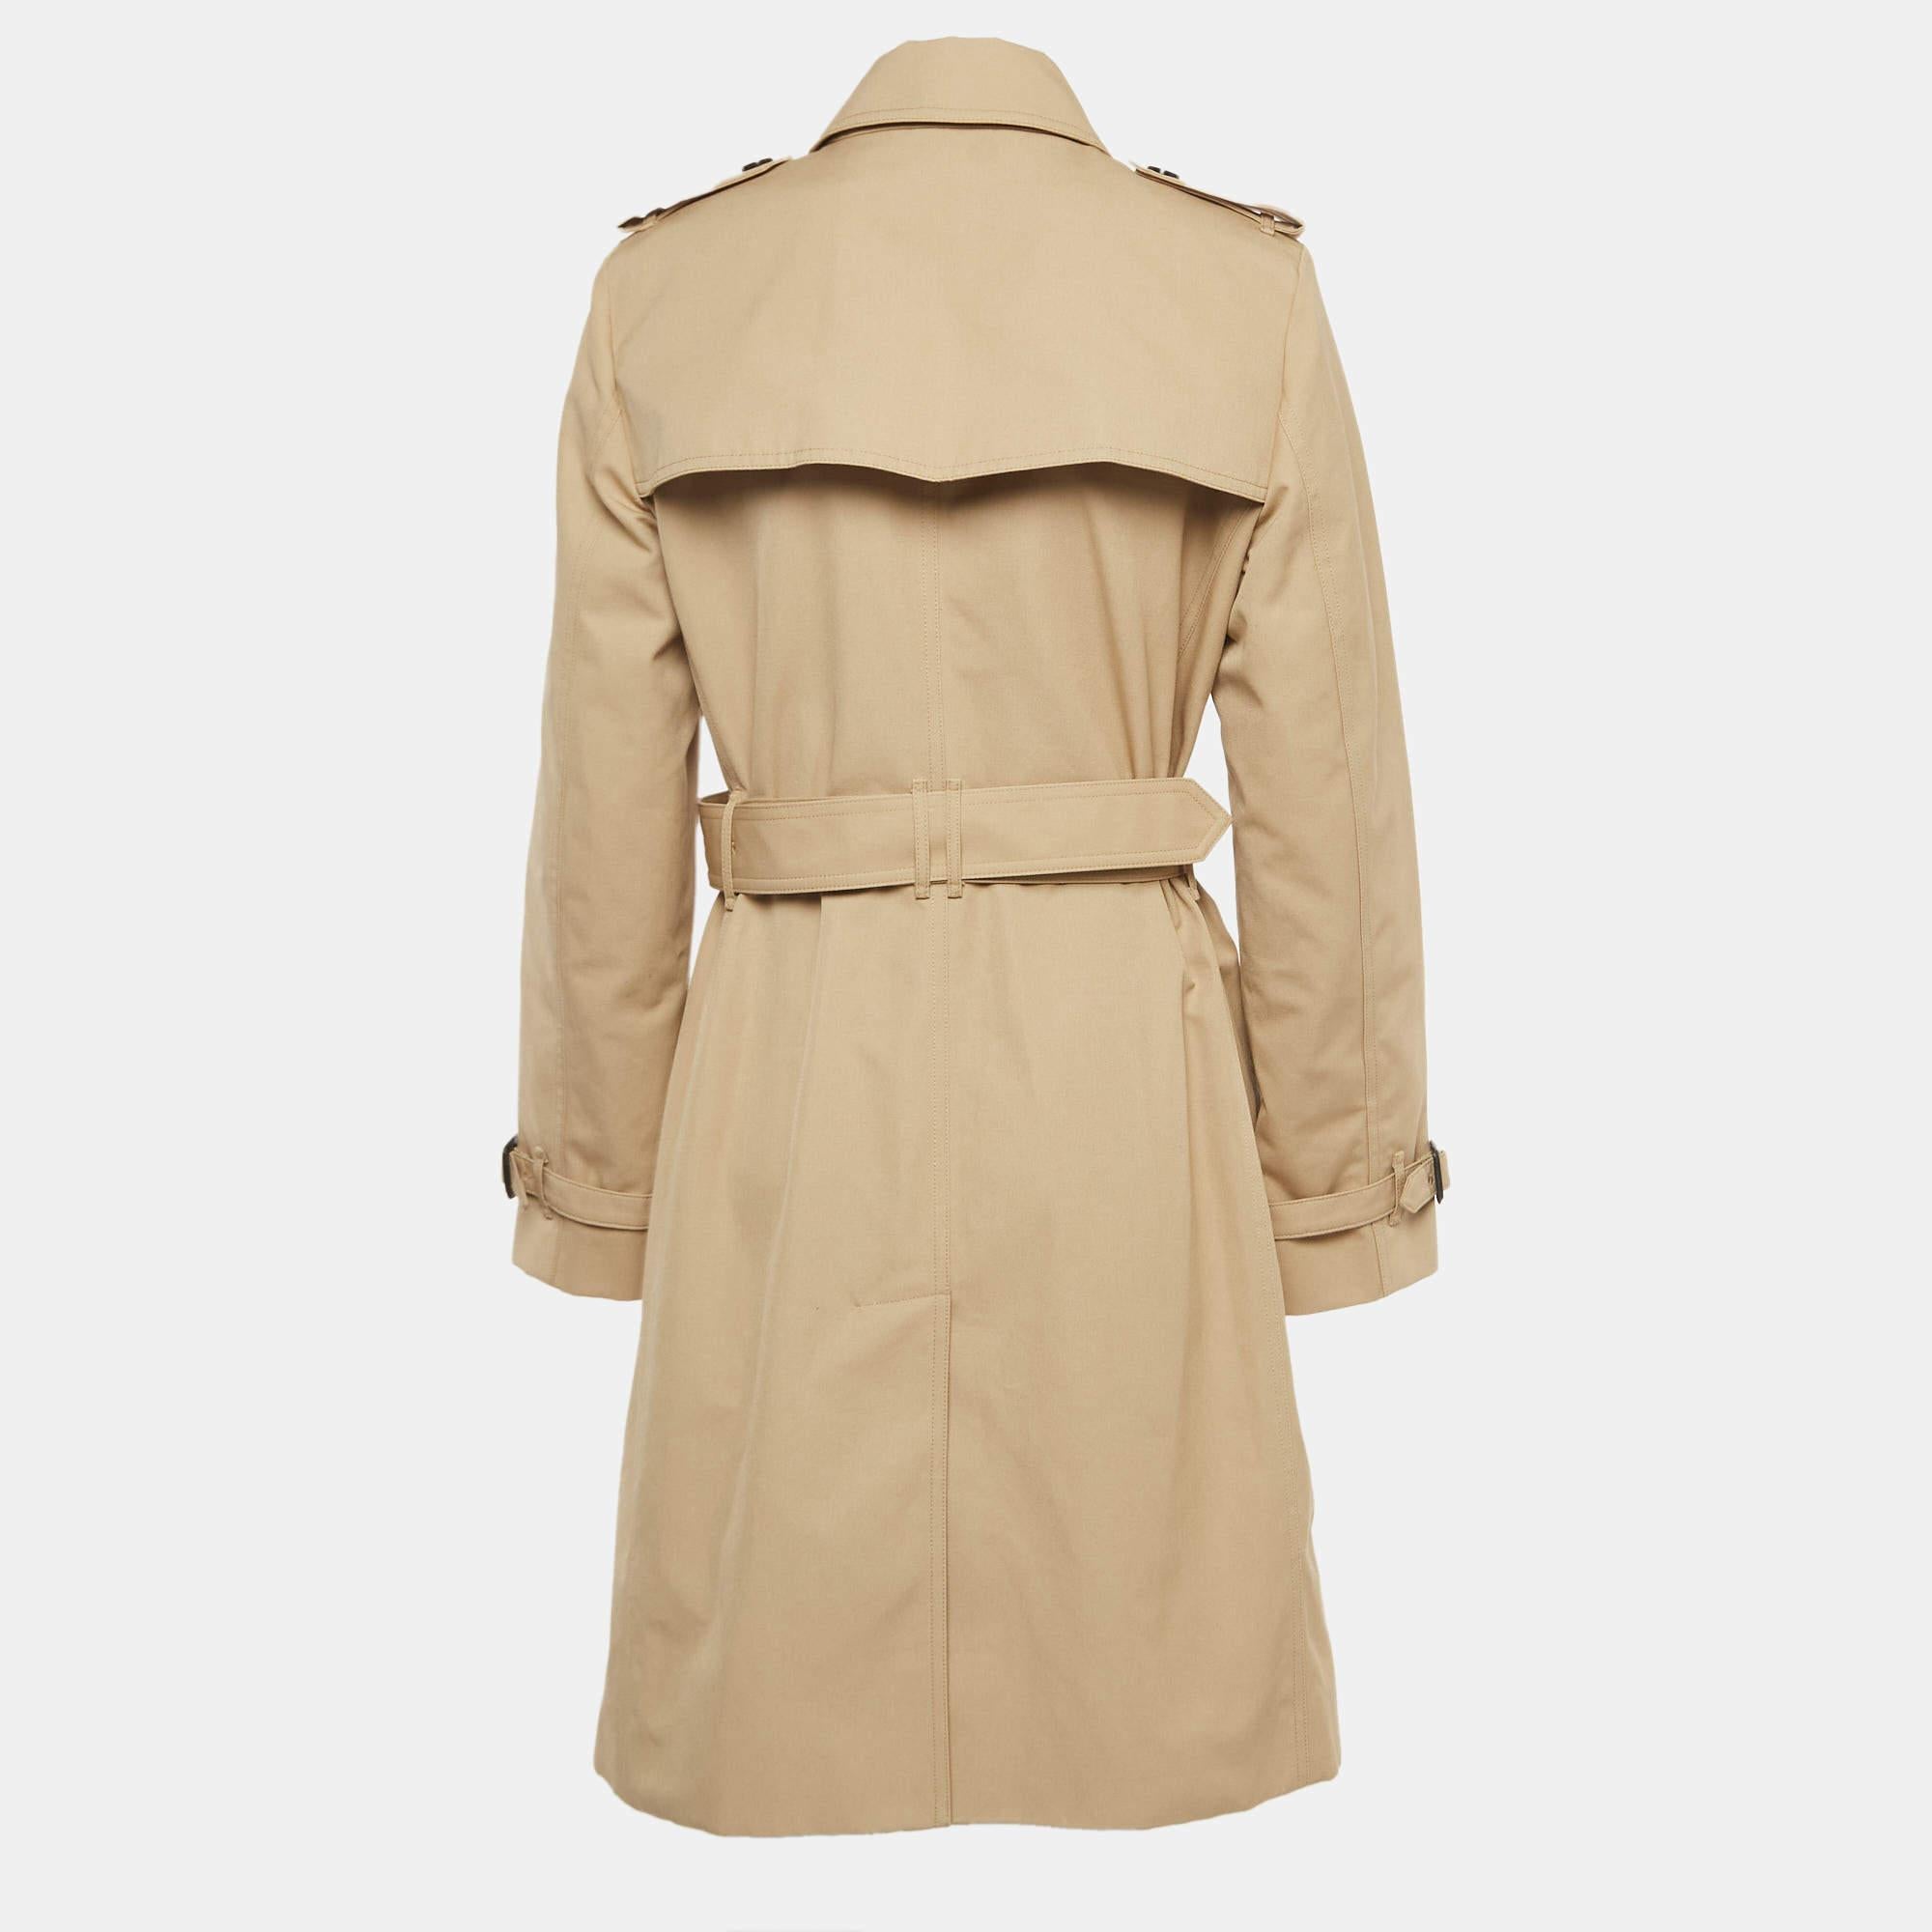 Burberry's trench coats are a dream addition to any woman's closet. Crafted from quality materials, it has a well-tailored silhouette and classic details.

